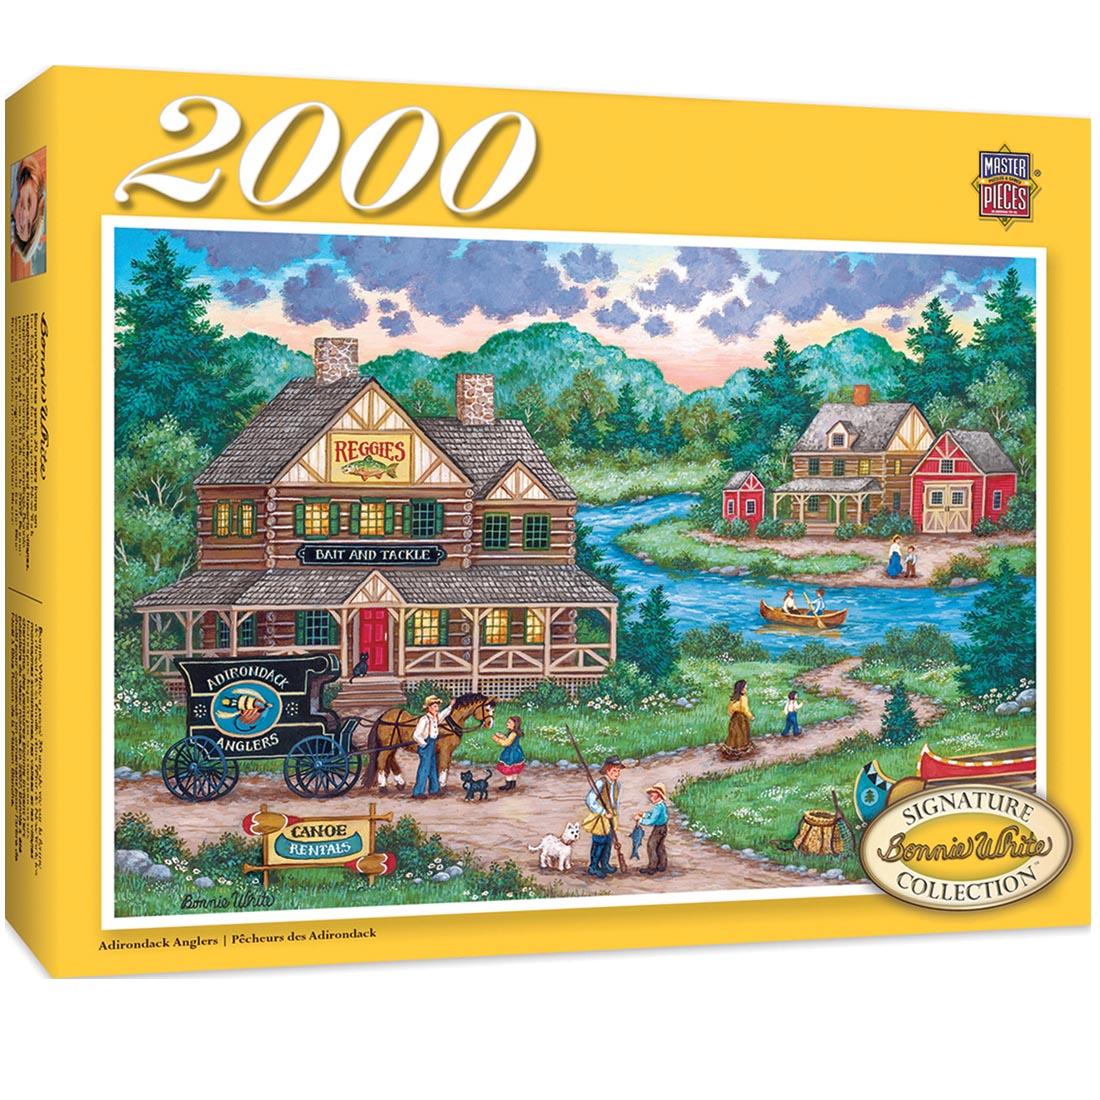 Signature Collection Adirondack Anglers 2000-Piece Puzzle by MasterPieces